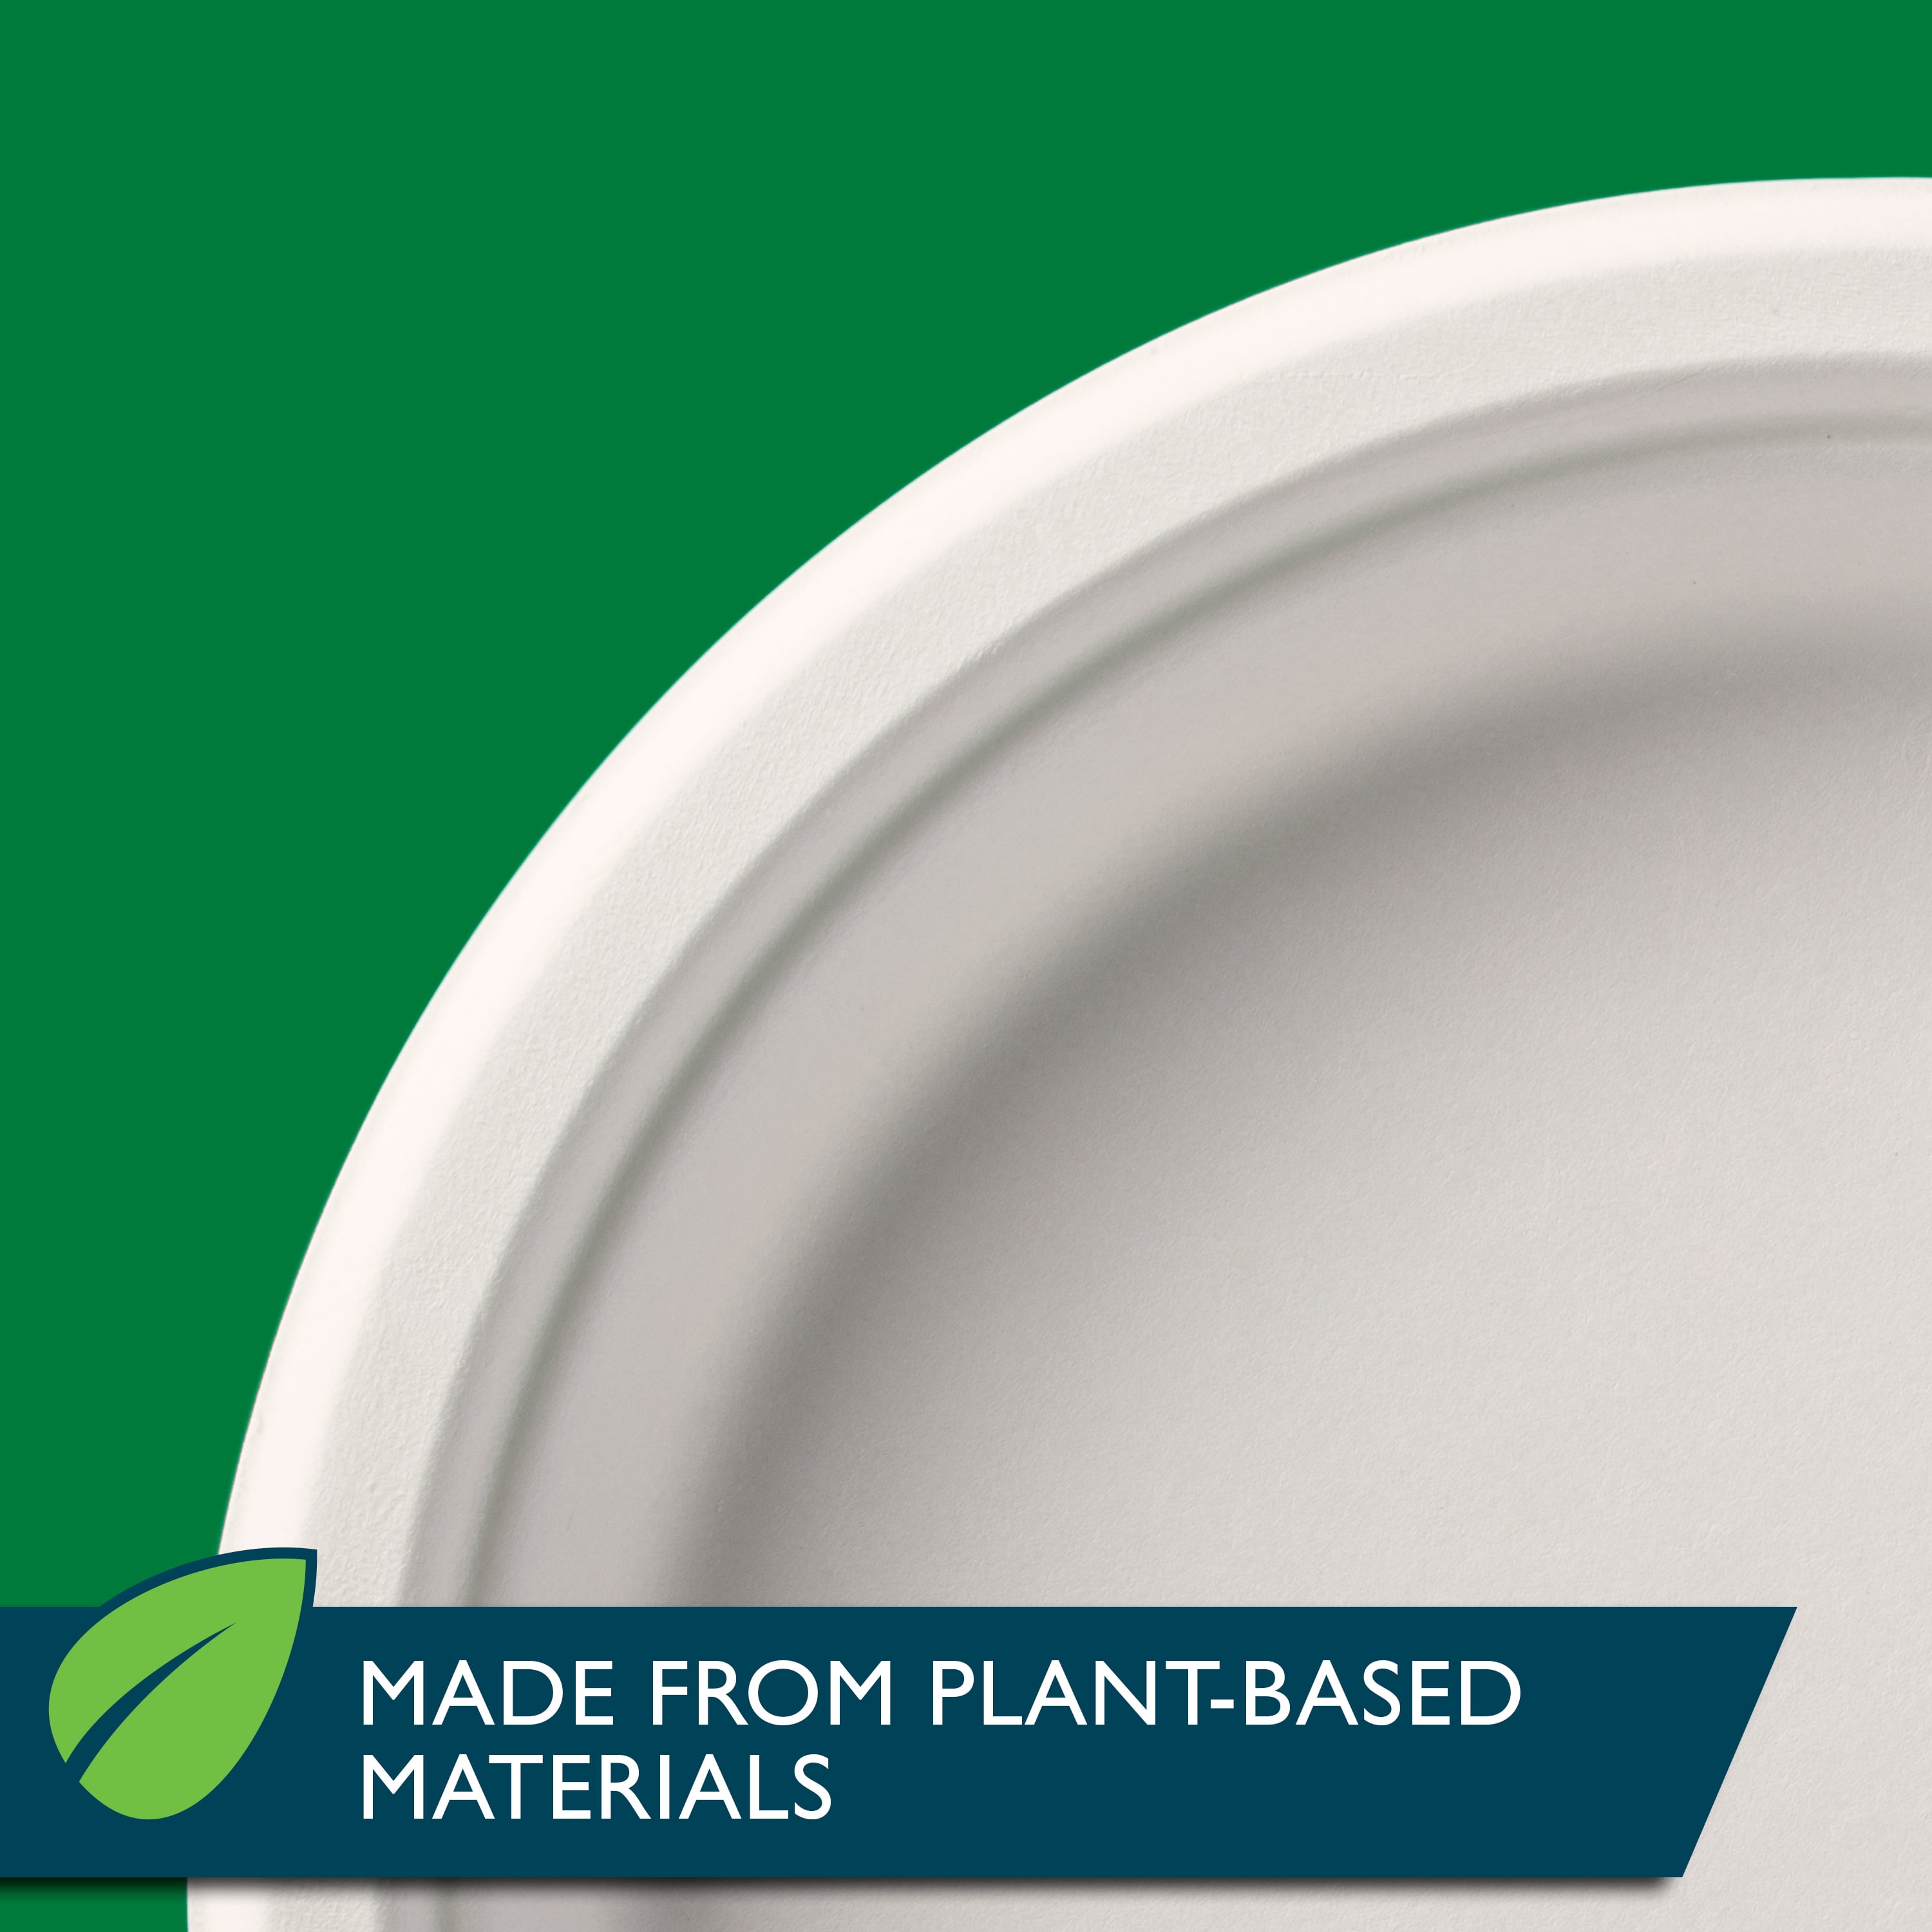 Hefty EcoSave™ 100% Compostable Paper Plates, 16 ct - Kroger